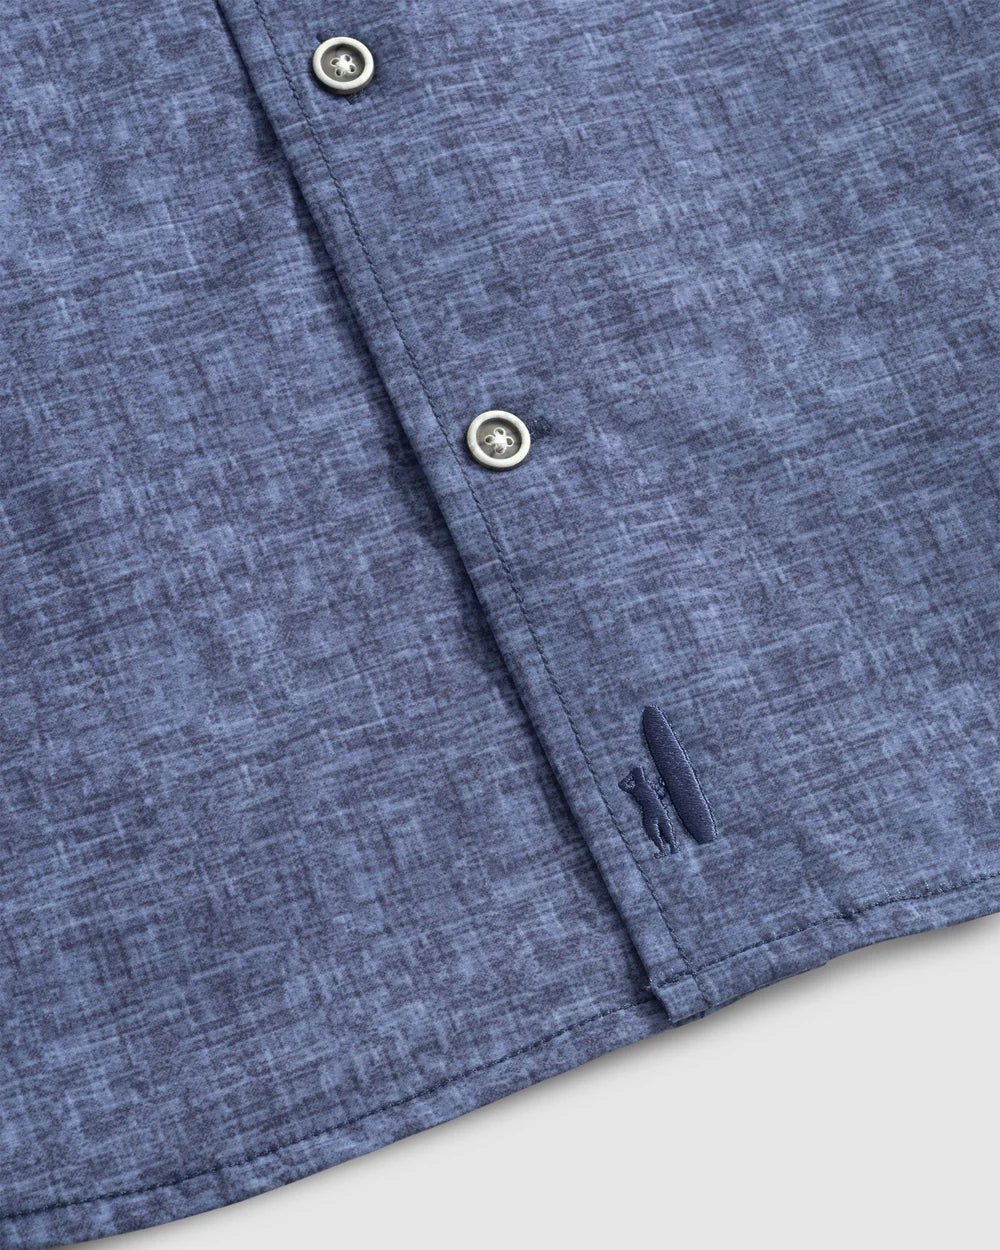 Designed to sit untucked, this shirt is cut like a button-up but with the fabric of a polo so you can take some of that performance comfort and blend it with some jeans or board shorts.